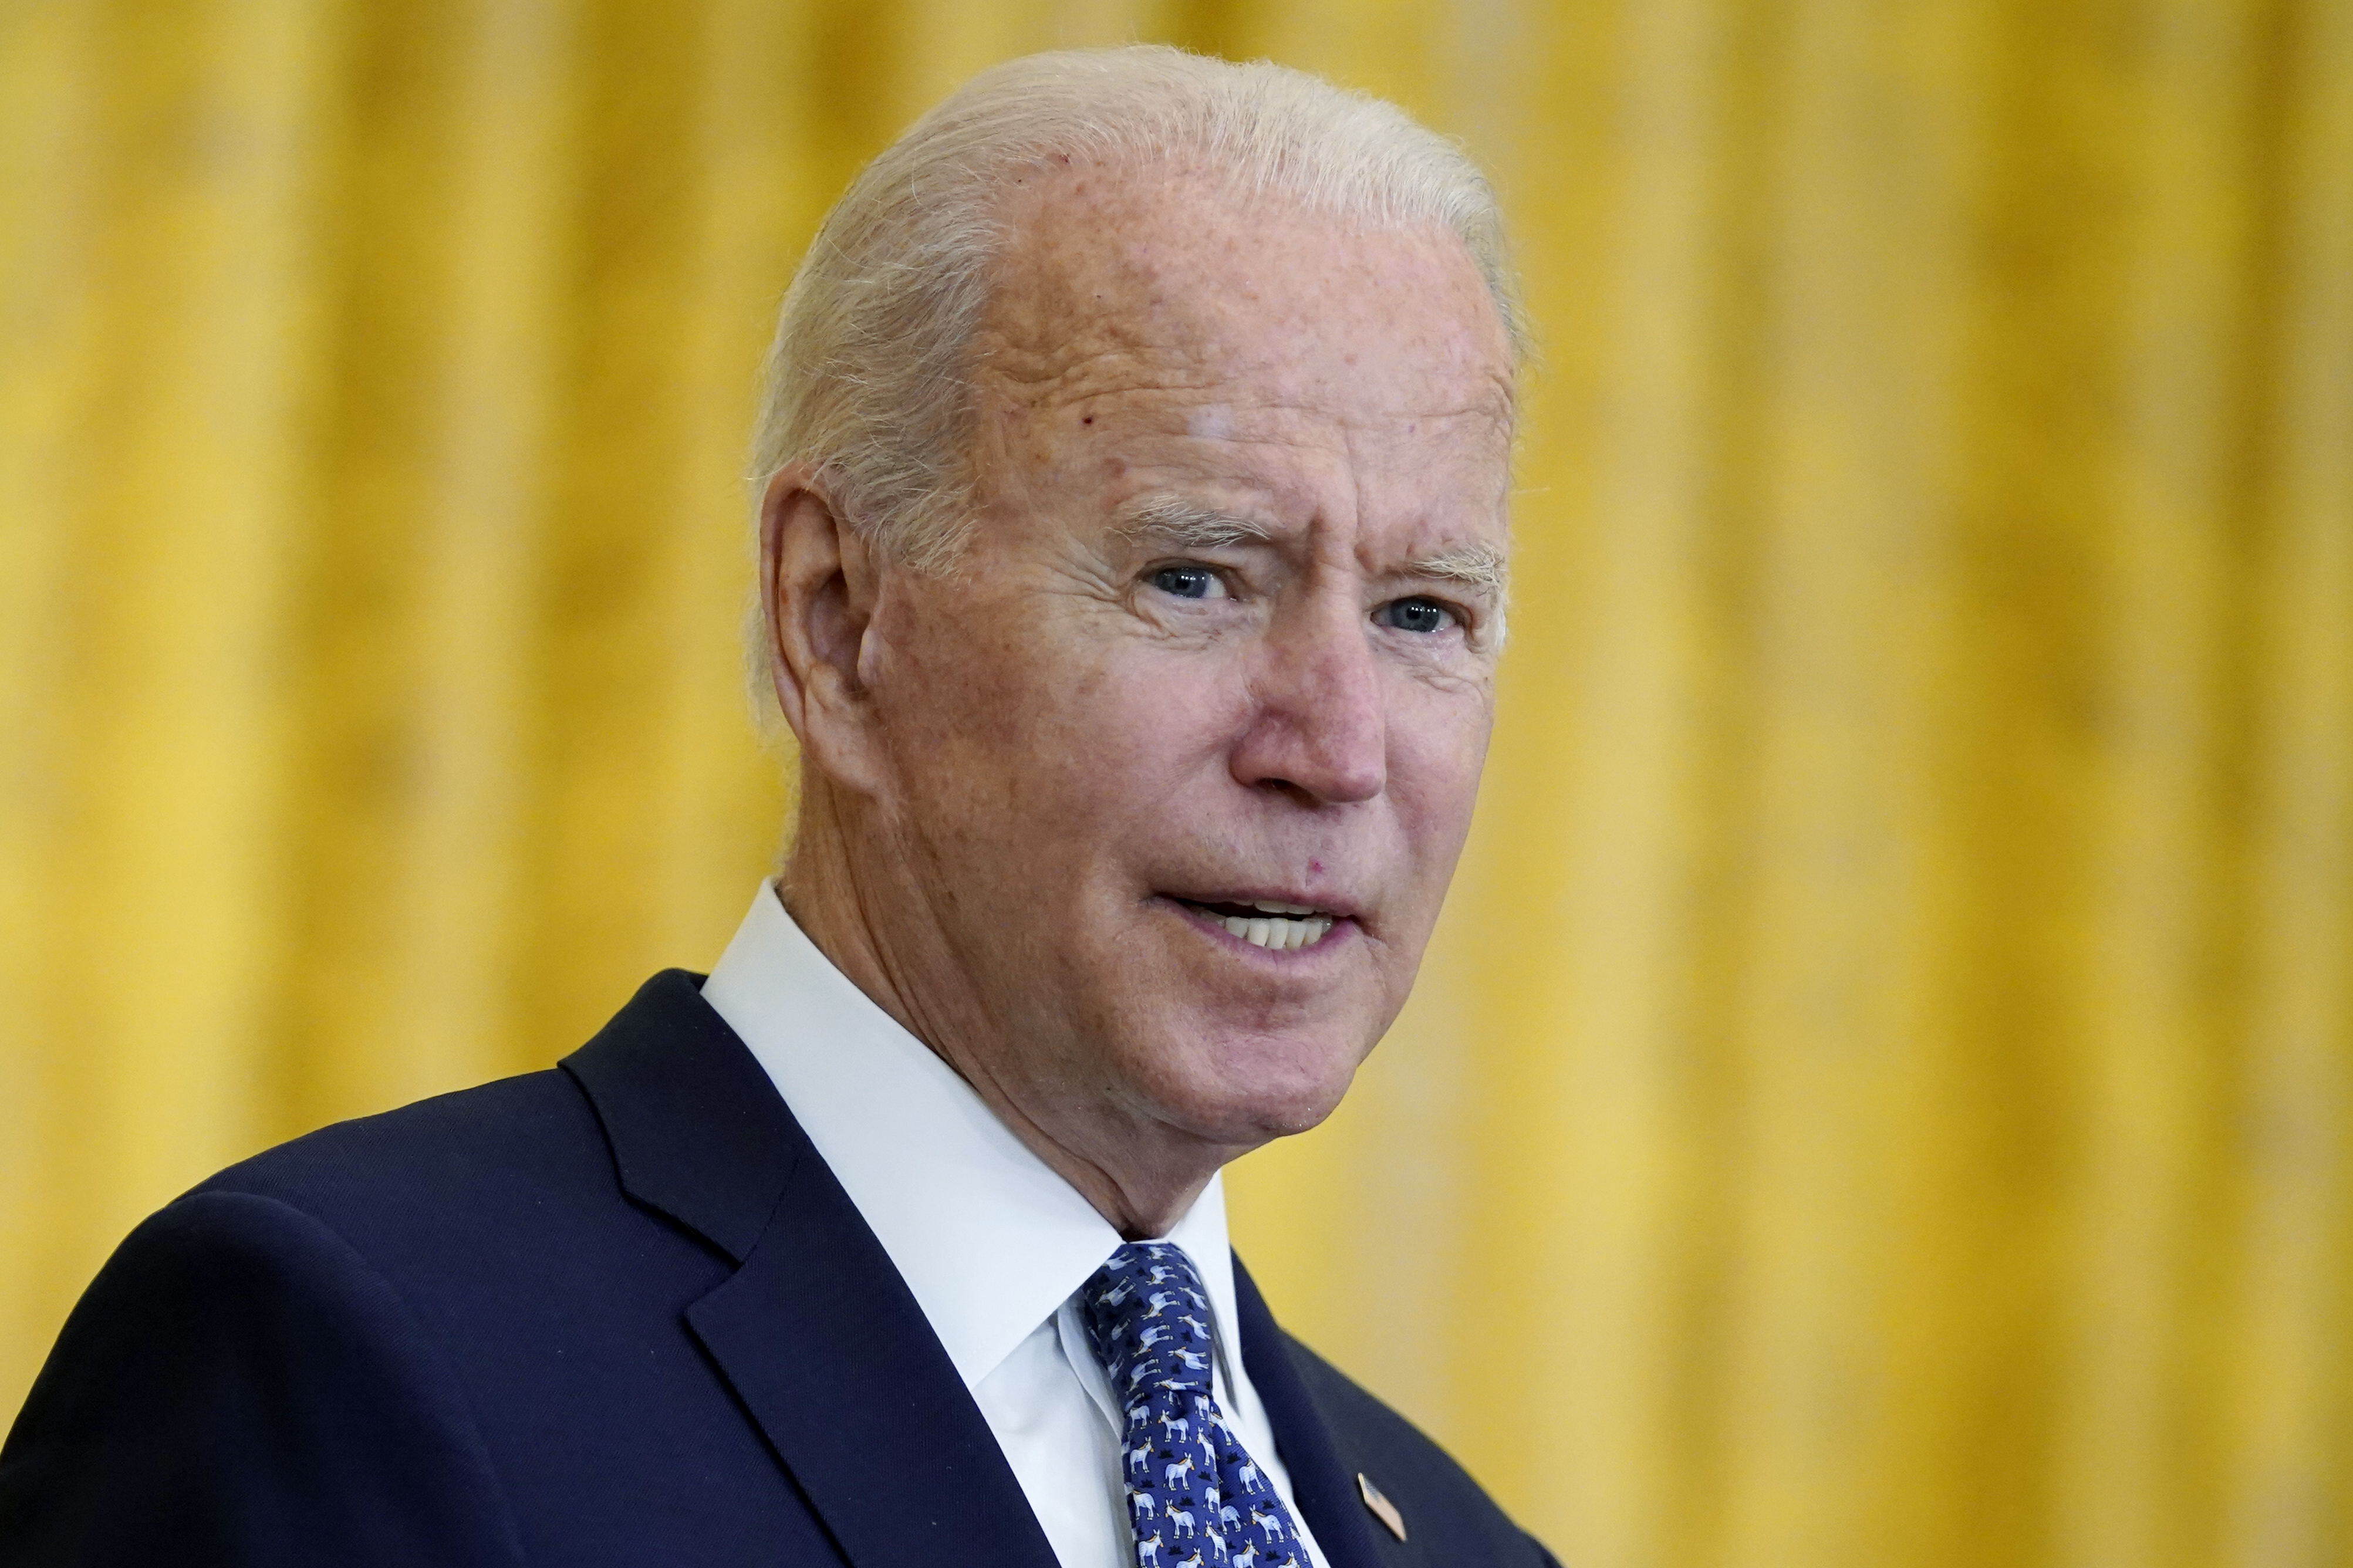 President Biden to visit New Jersey Thursday, set to participate in reception for Democratic National Committee